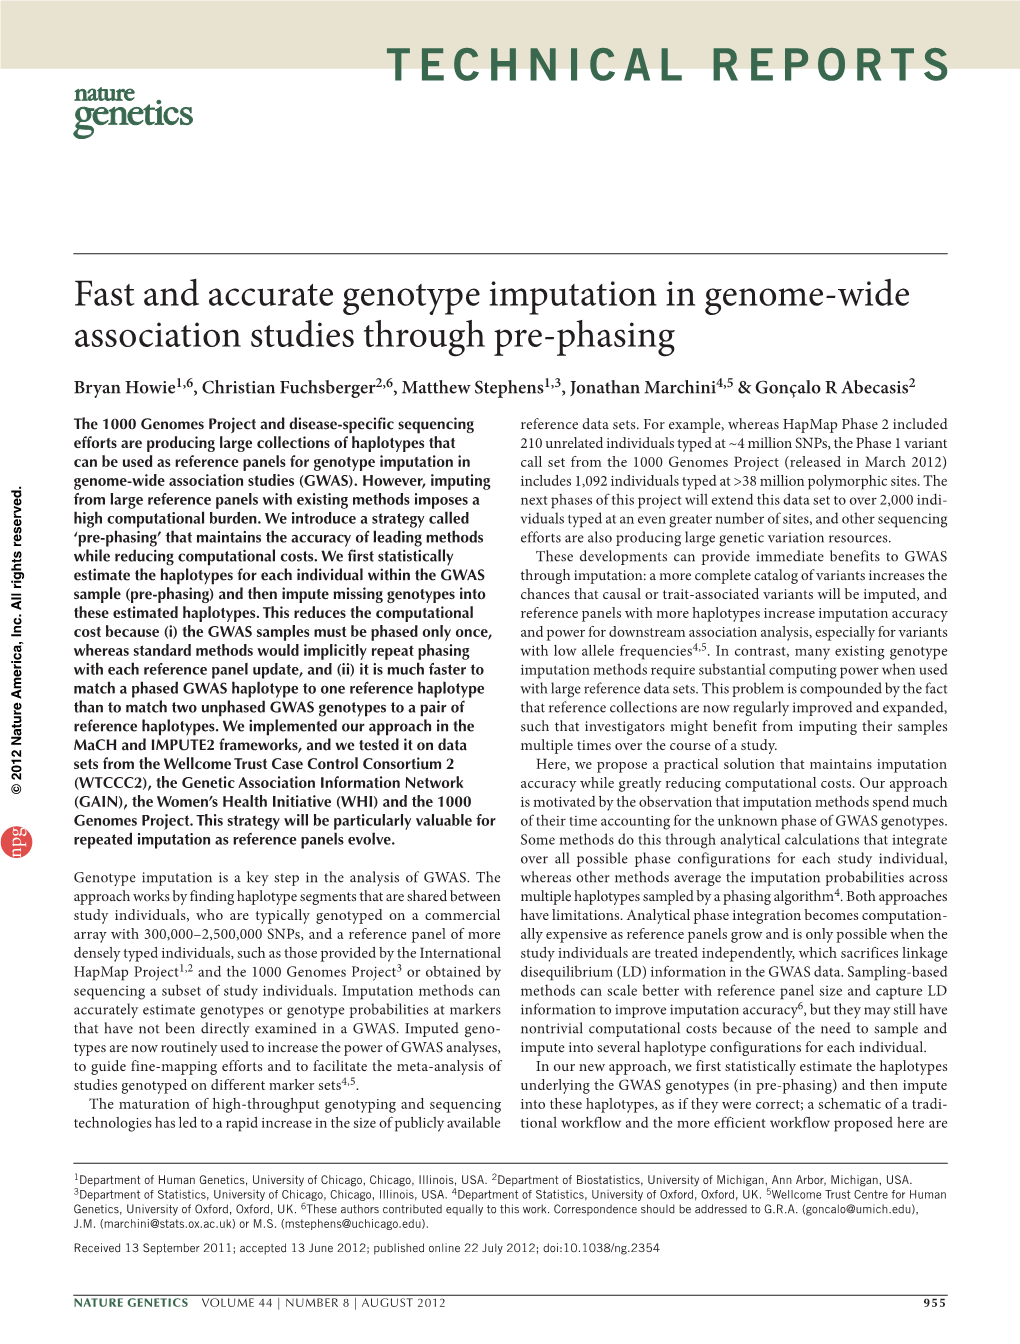 Fast and Accurate Genotype Imputation in Genome-Wide Association Studies Through Pre-Phasing